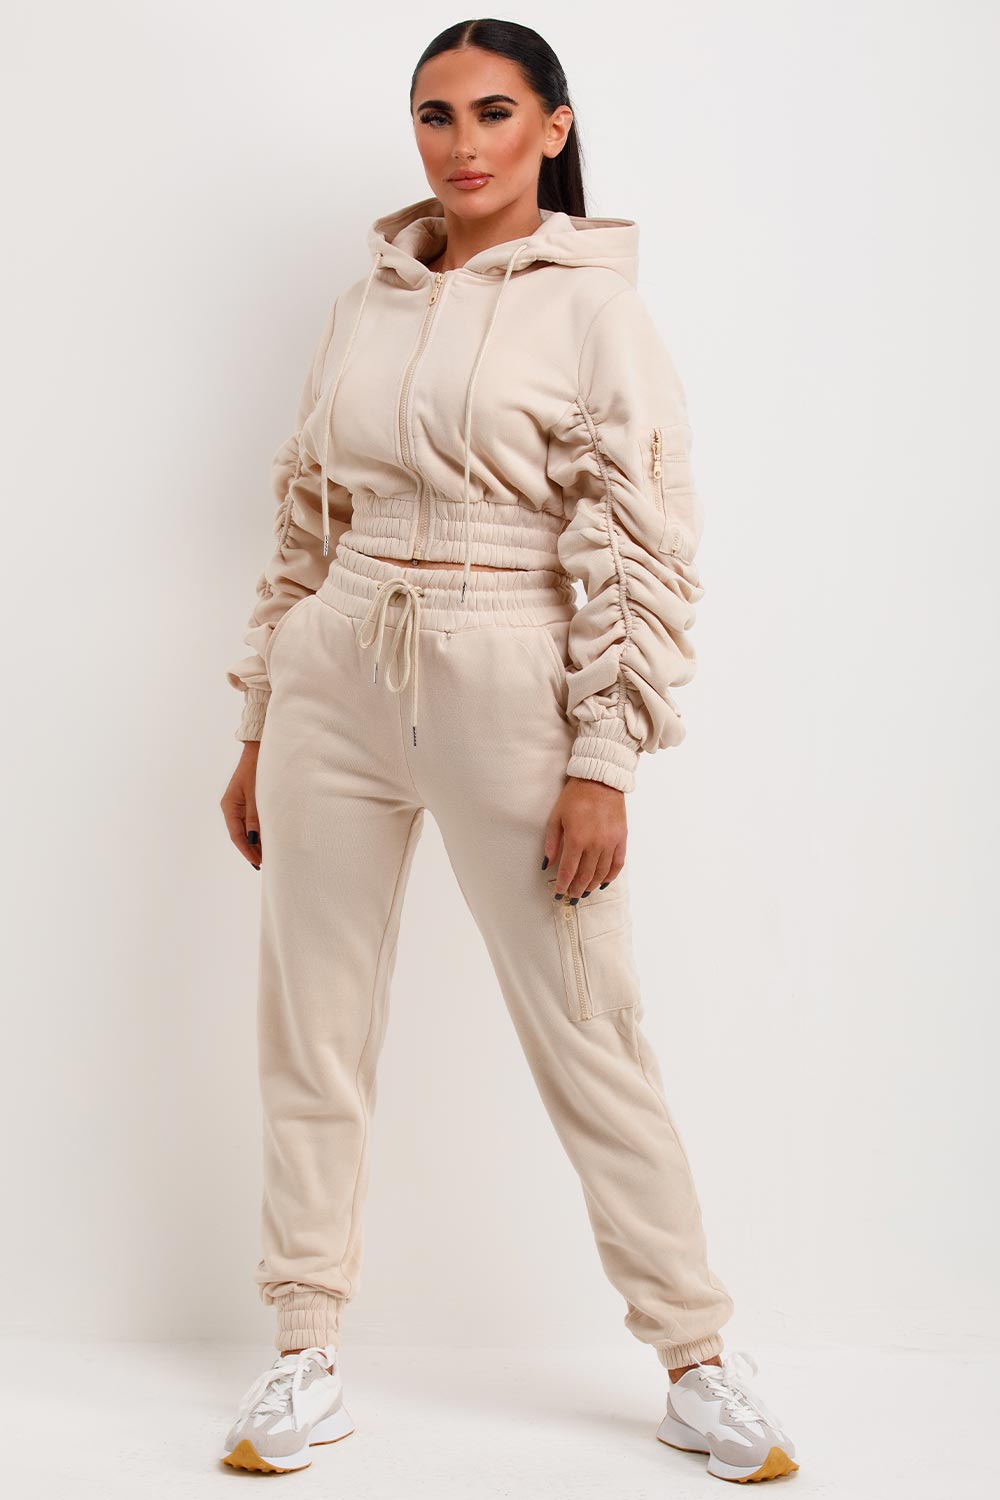 ruched sleeve hoodie and joggers loungewear co ord set